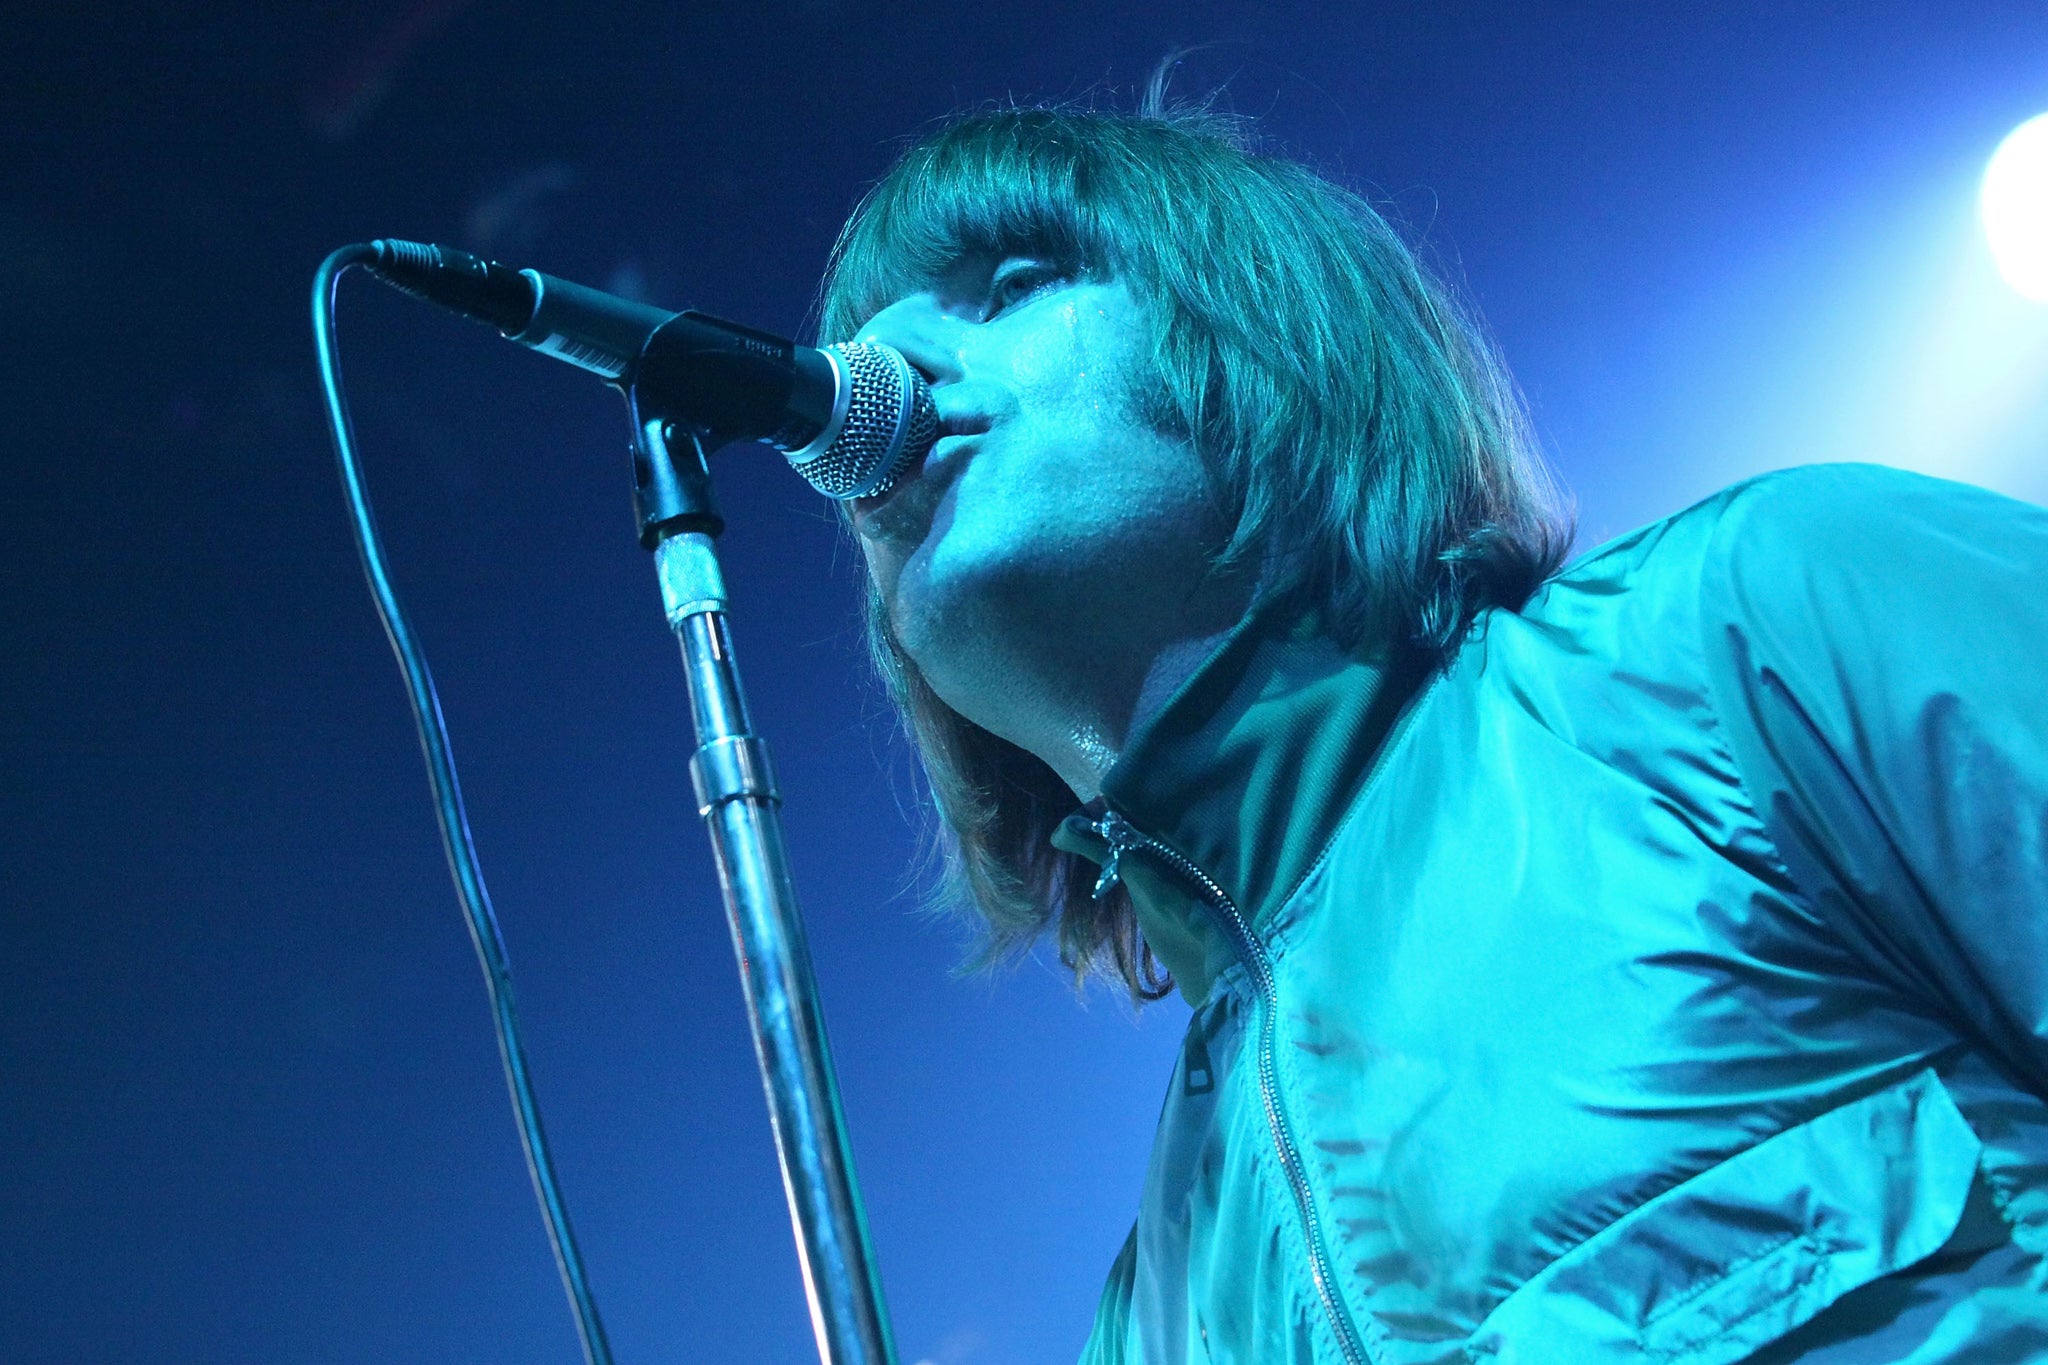 Liam Gallagher performs with Beady Eye in New York